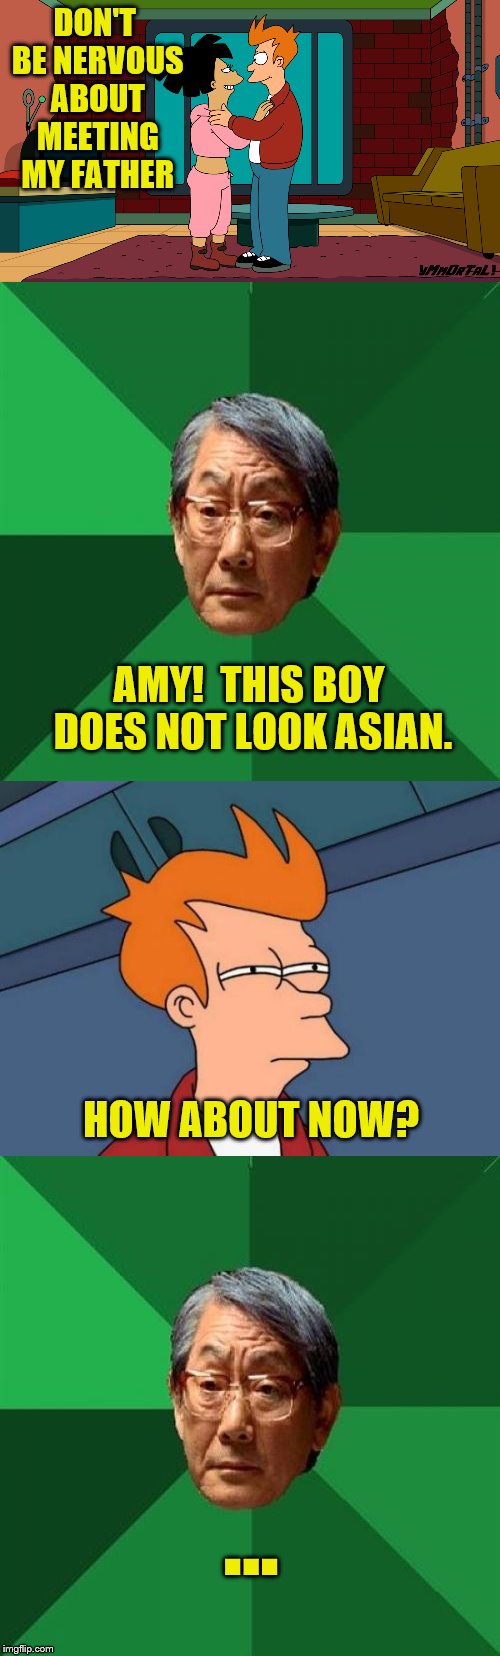 Father does not approve. | DON'T BE NERVOUS ABOUT MEETING MY FATHER; AMY!  THIS BOY DOES NOT LOOK ASIAN. HOW ABOUT NOW? ... | image tagged in memes,futurama fry,amy wong,high expectations asian father | made w/ Imgflip meme maker